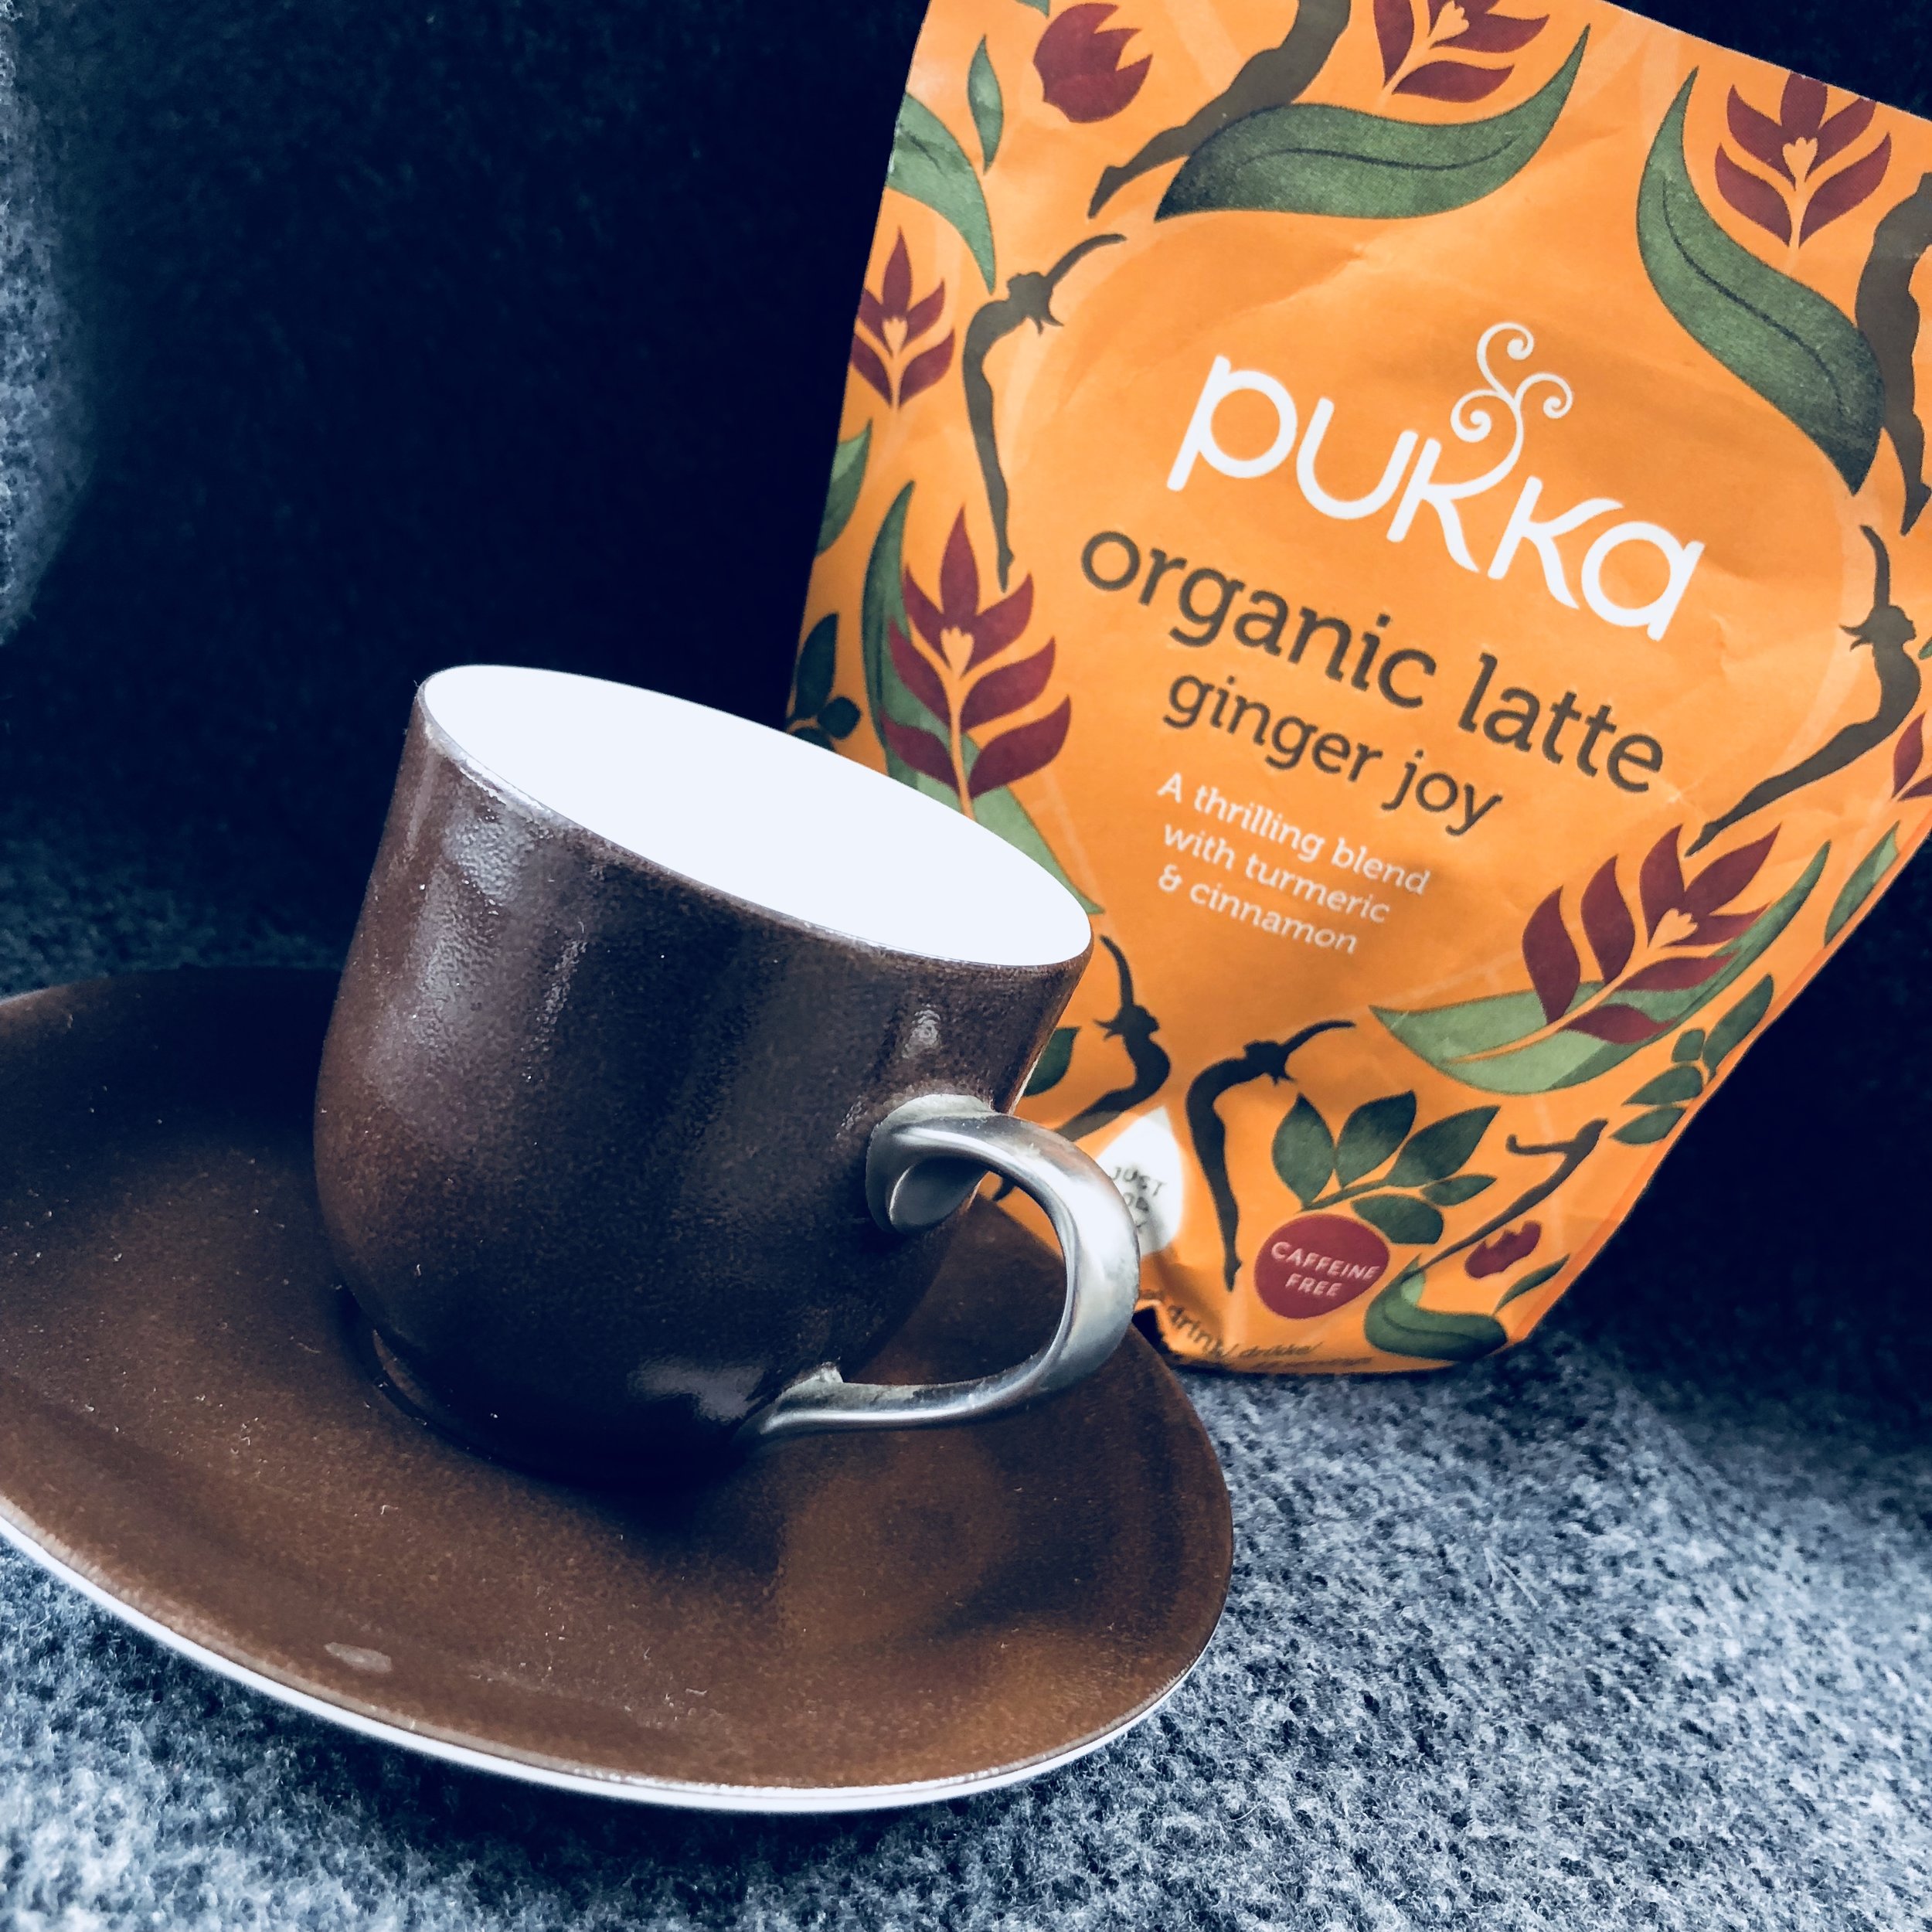 Pukka Herbs launches line of organic herbal lattes